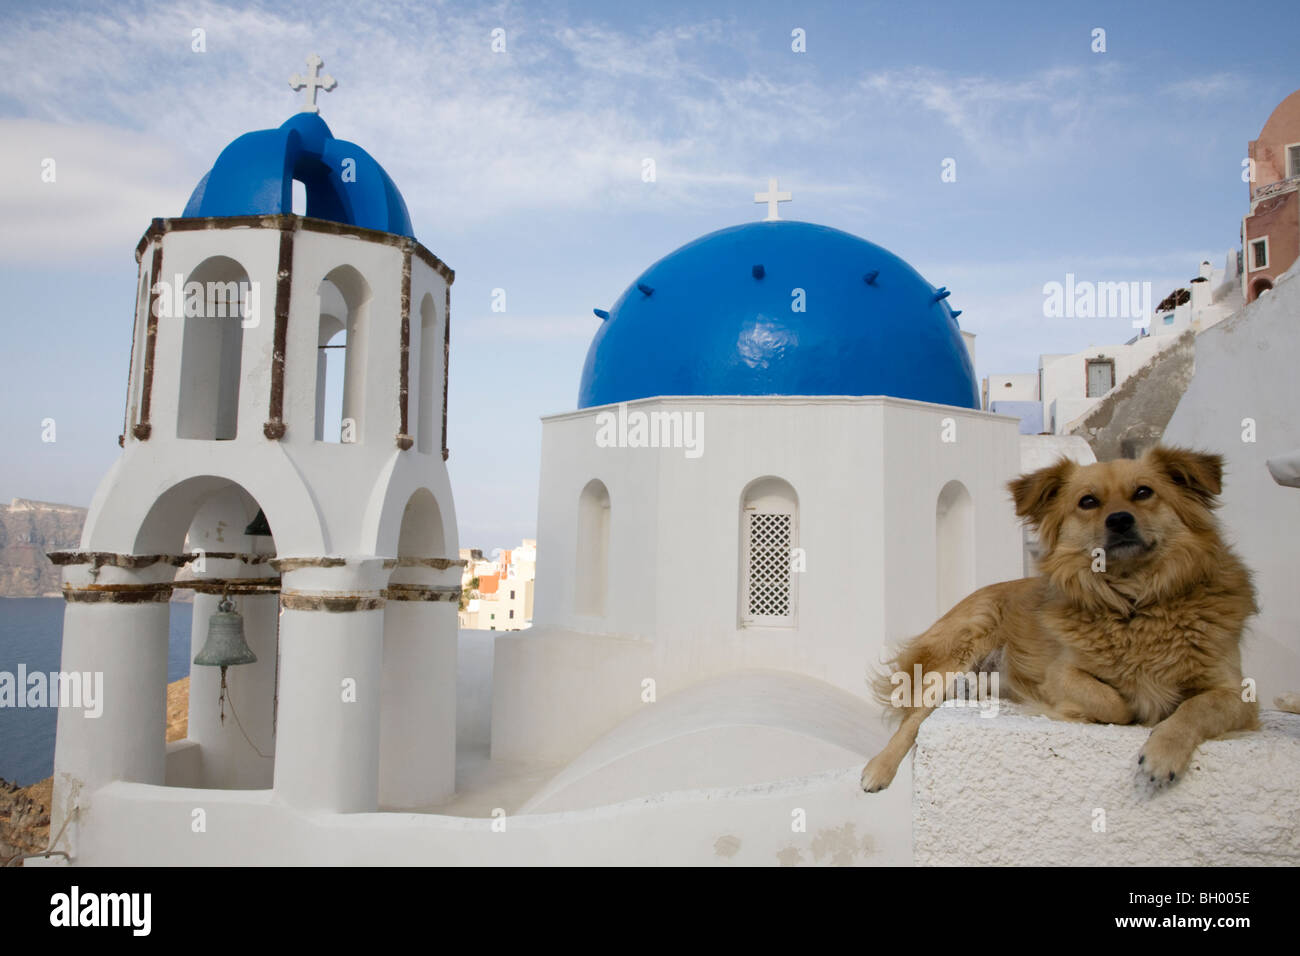 Dog relaxing on white gatepost in front of blue-domed church and bell tower Stock Photo